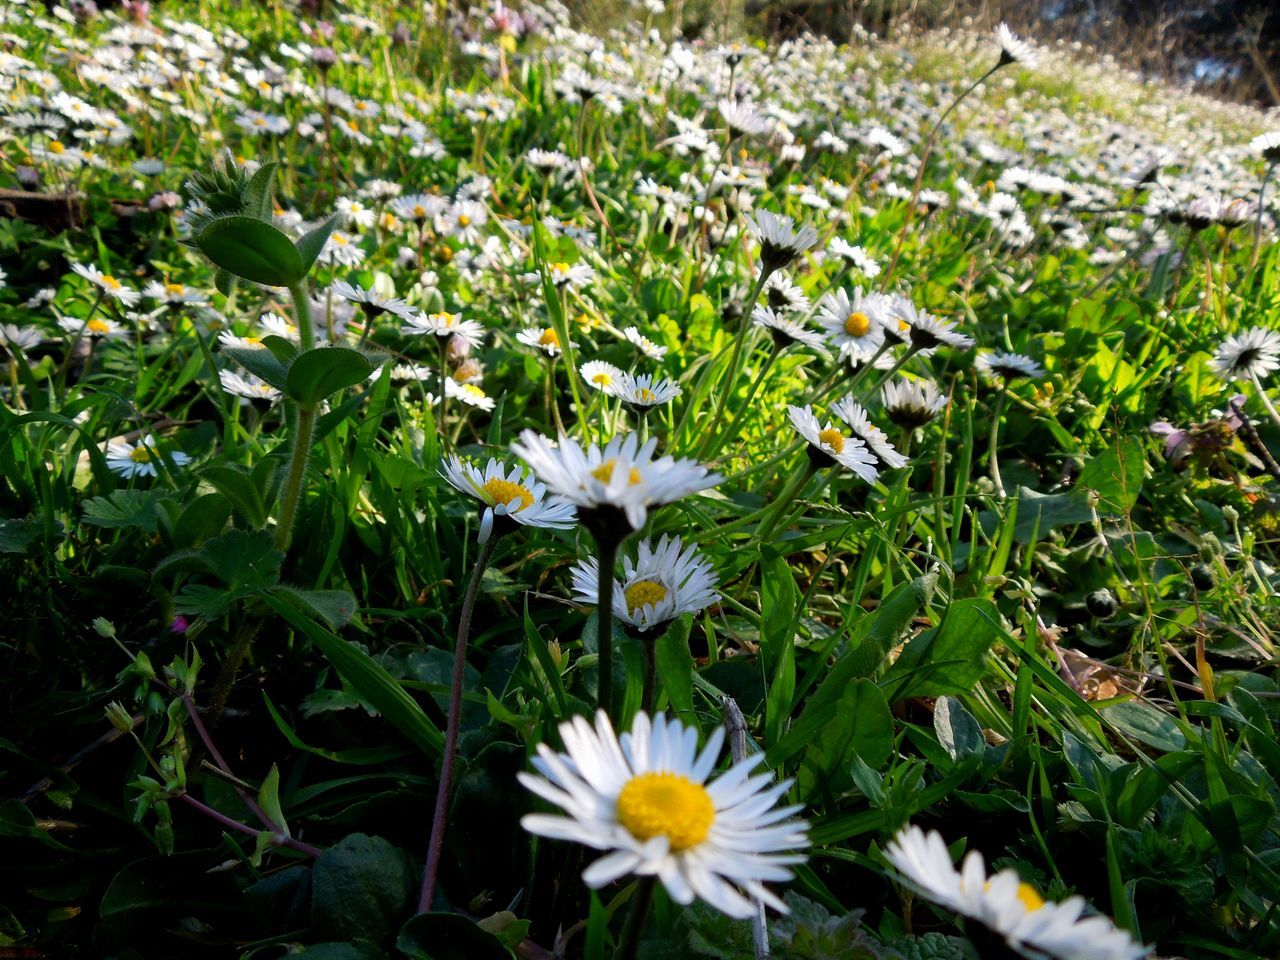 plant, flower, flowering plant, freshness, beauty in nature, growth, fragility, grass, nature, daisy, white, petal, garden, meadow, flower head, green, inflorescence, wildflower, no people, field, close-up, day, high angle view, lawn, land, leaf, plant part, outdoors, pollen, botany